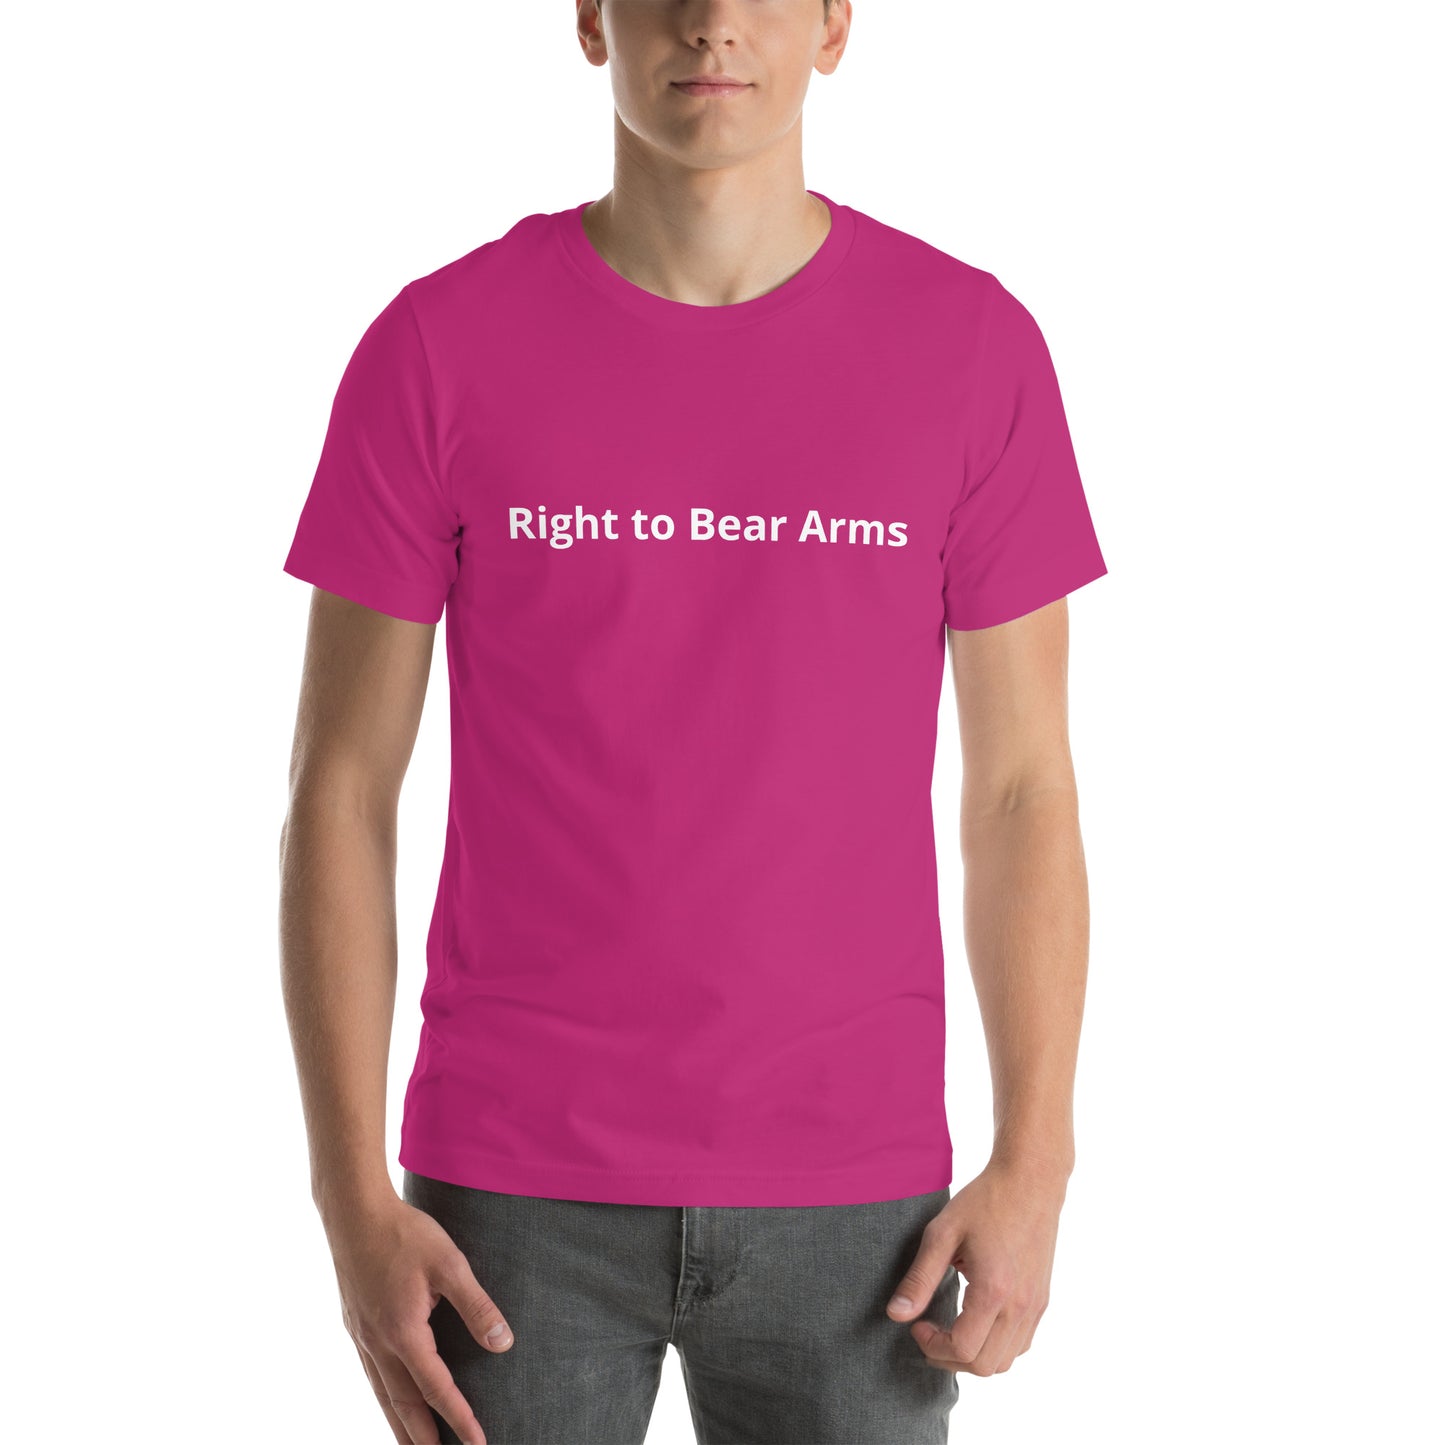 Right to Bear Arms Unisex T-ShirtUnisex t-shirt